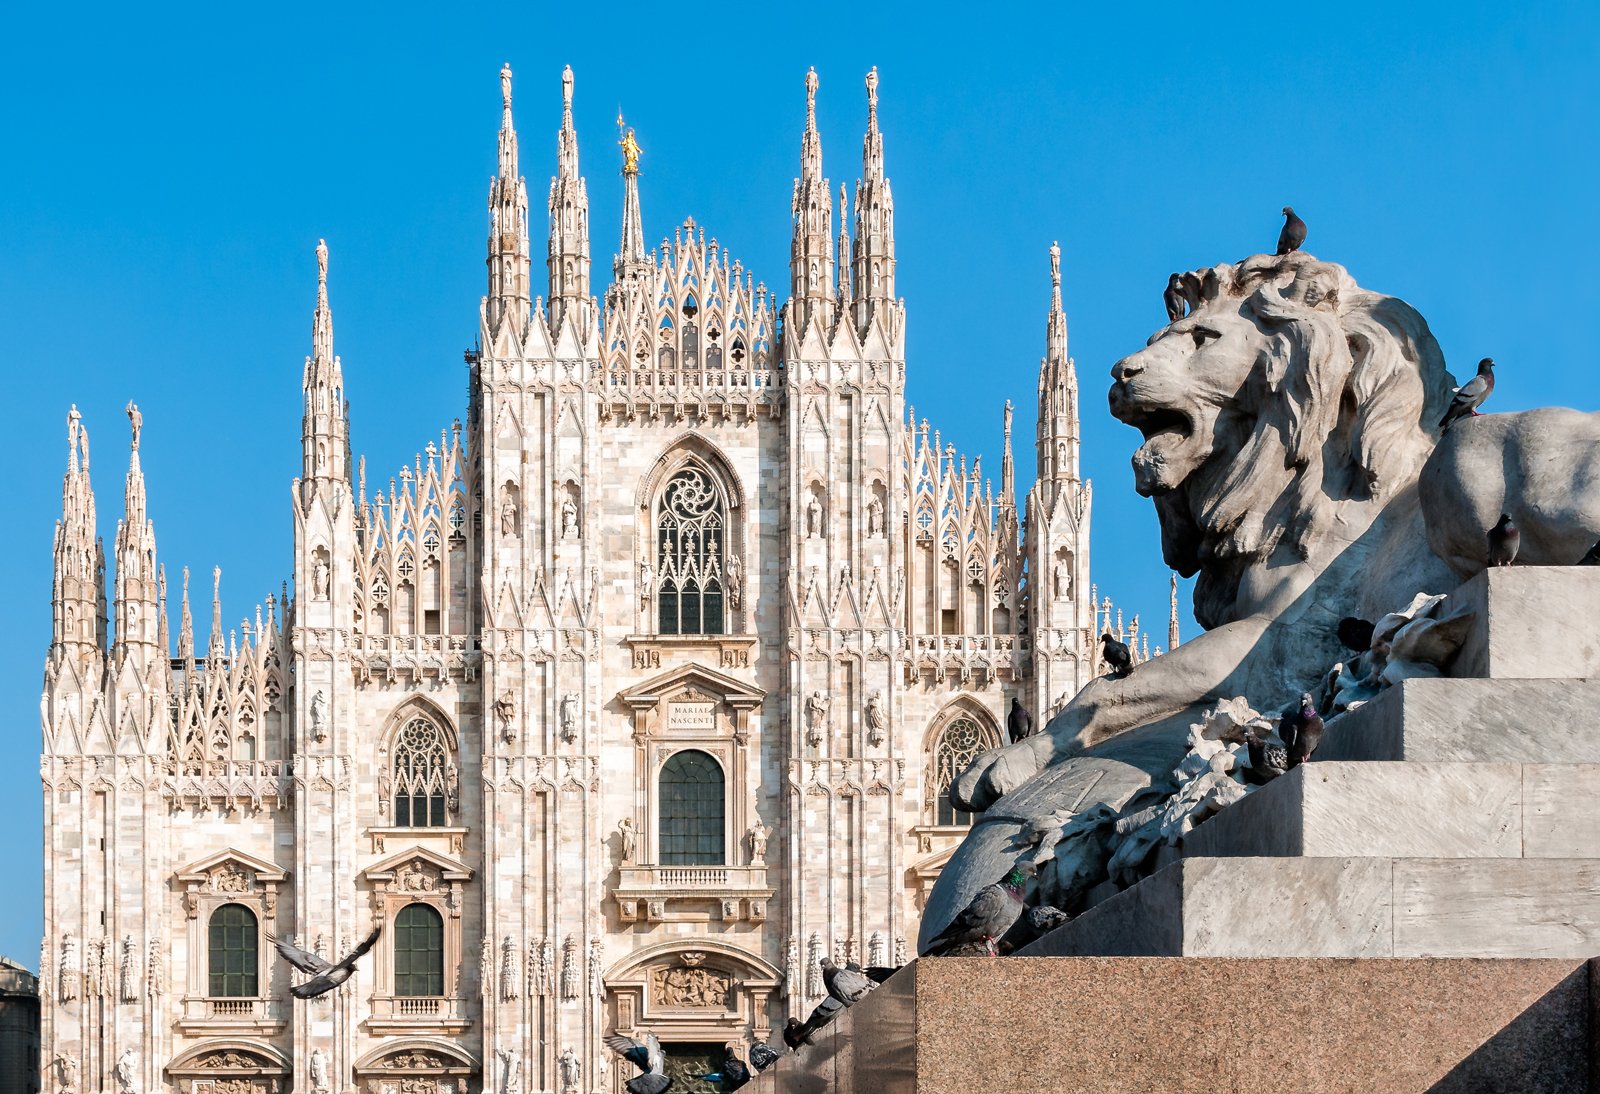 Milan's Gothic cathedral presides over the city centre